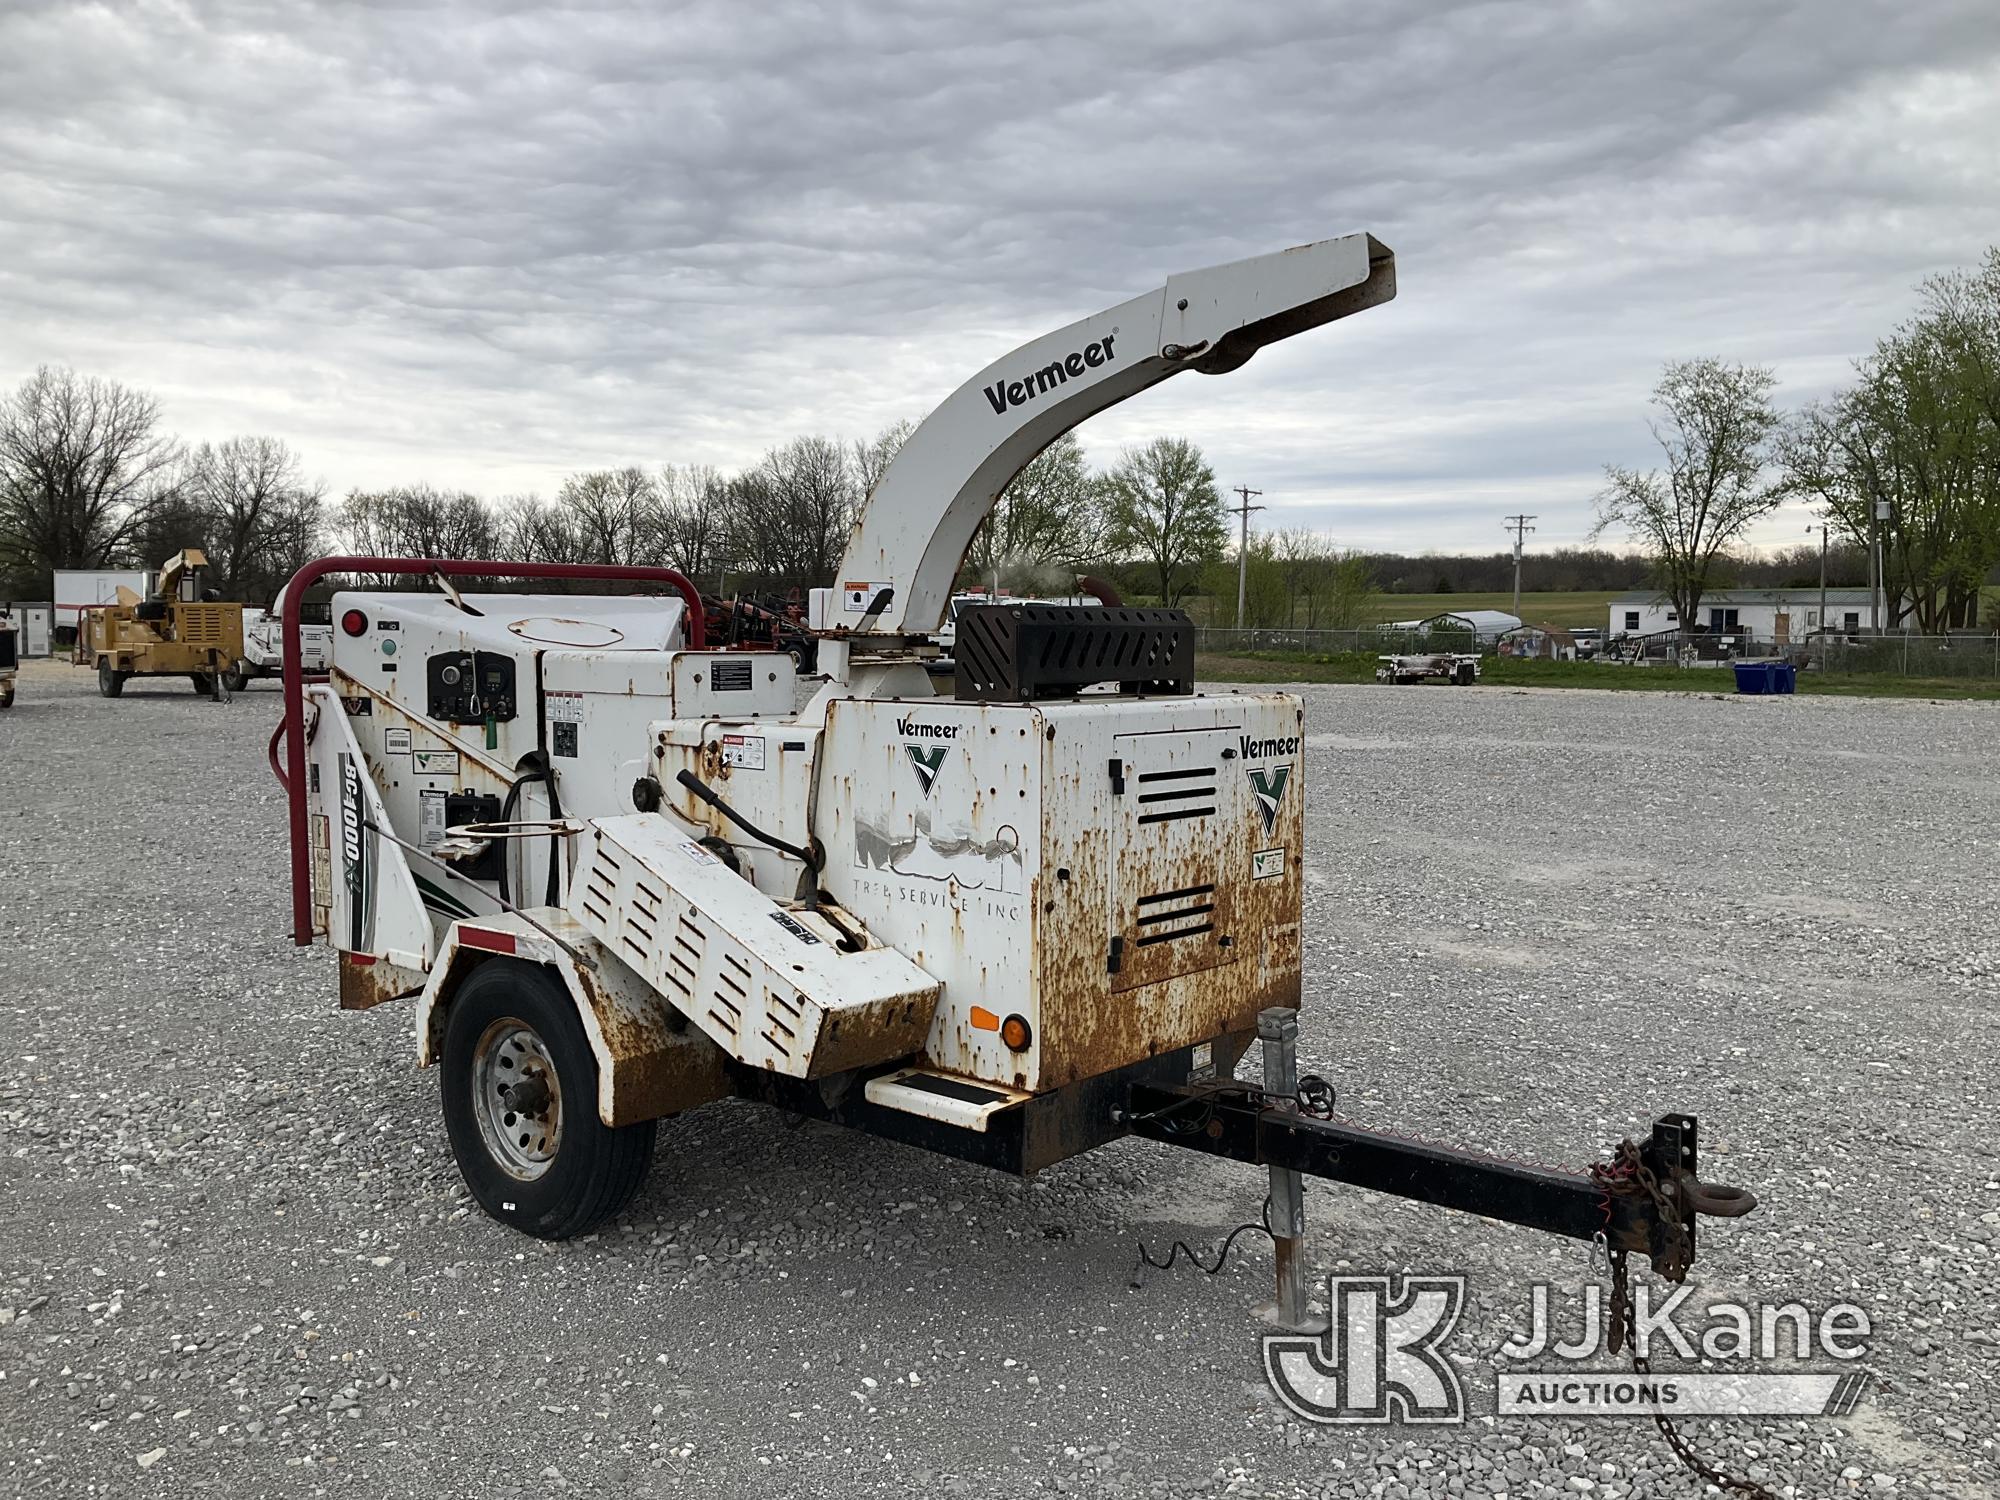 (Hawk Point, MO) 2016 Vermeer BC1000XL Chipper (12in Drum) No Title) (Runs & Operates) (Rust & Paint